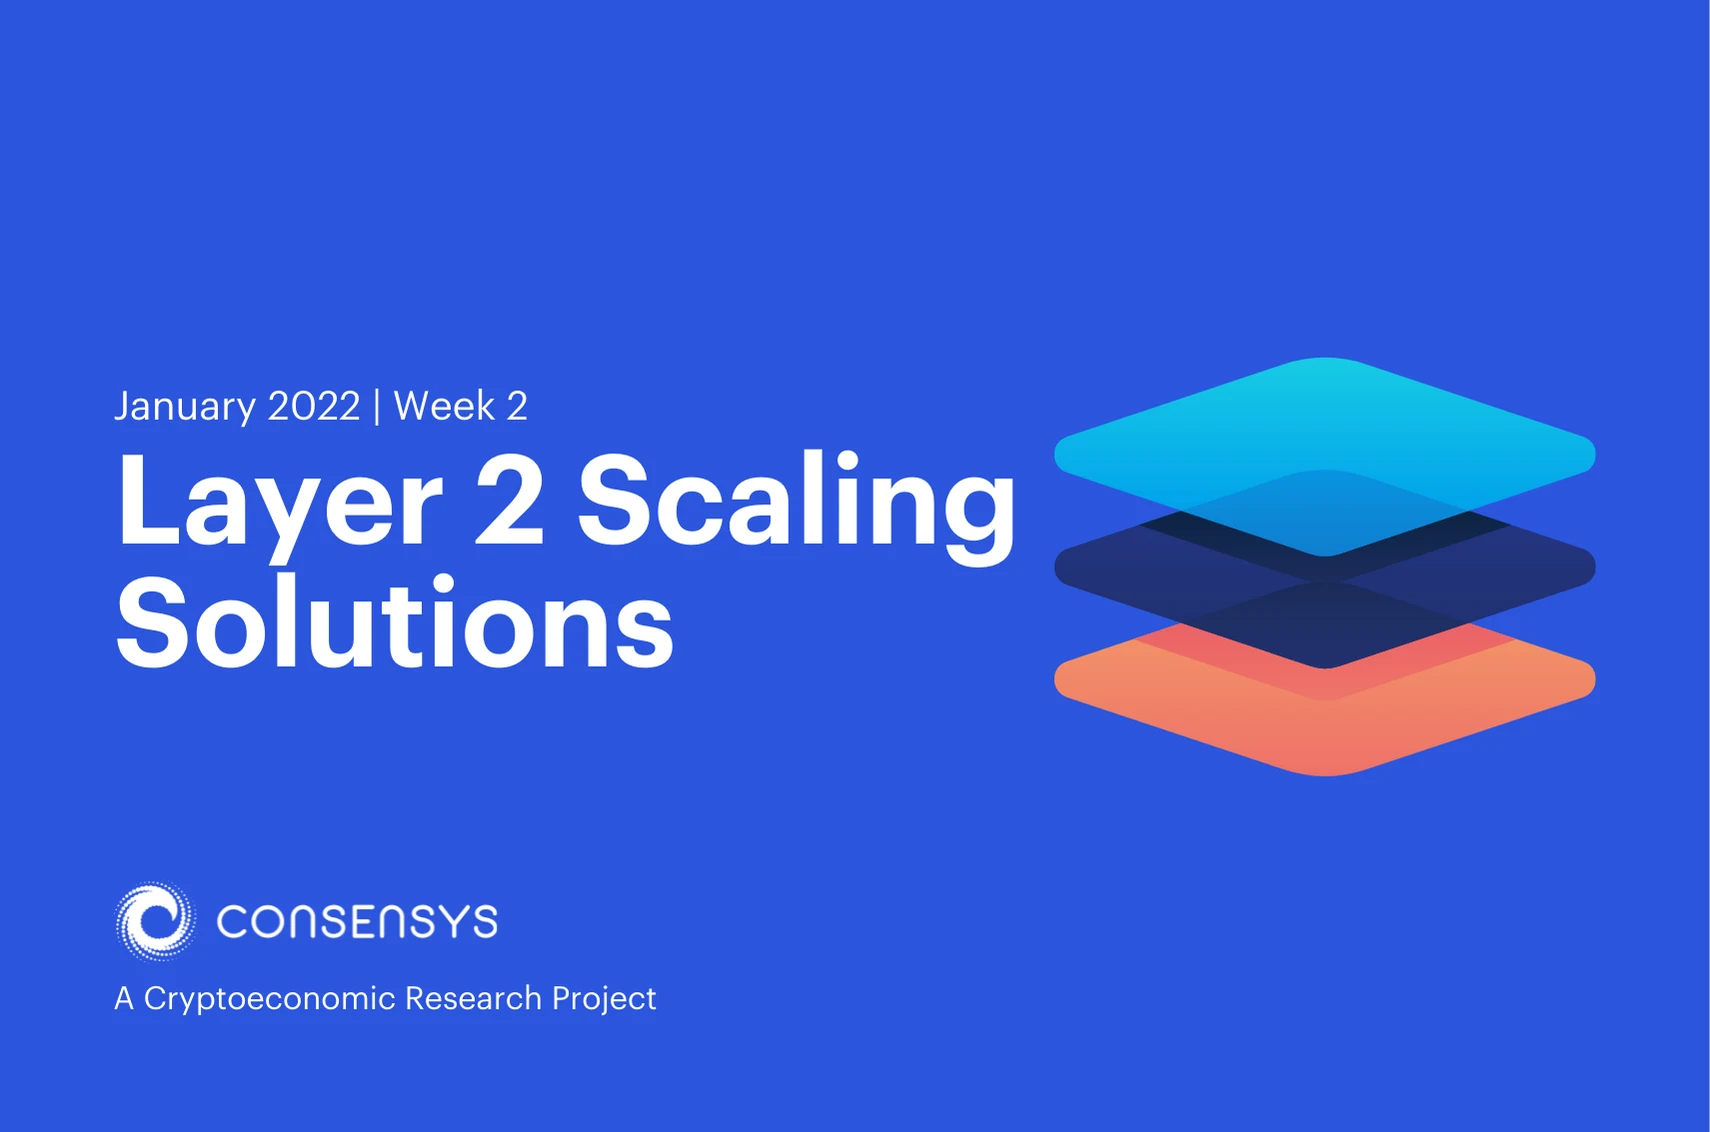 Image: Layer 2 Scaling Solutions | January 2022 | Week 2